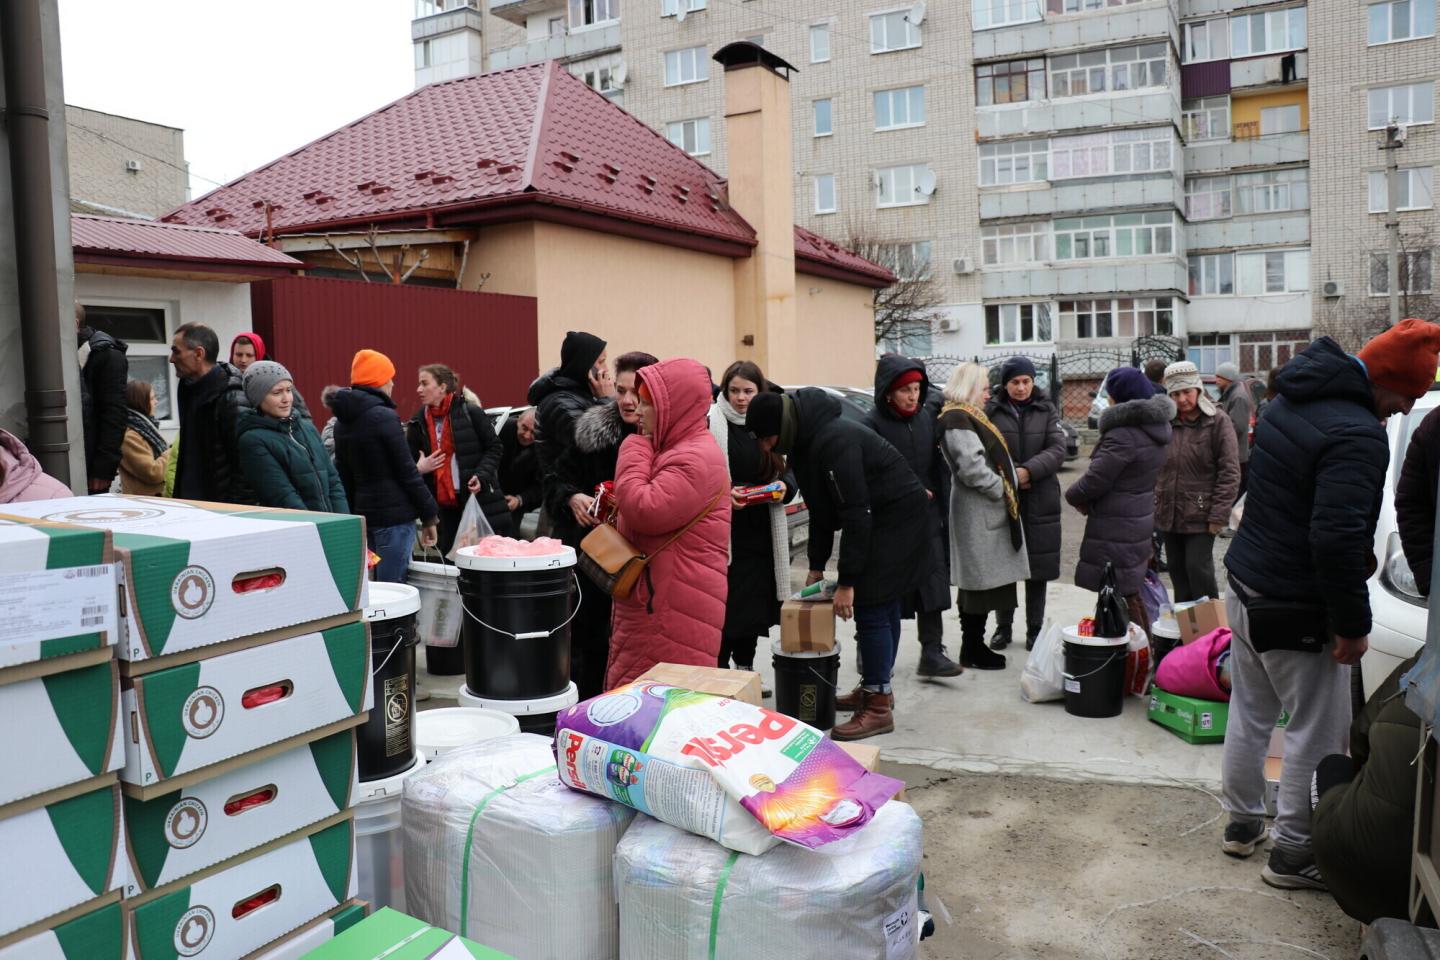 A group of Ukrainians in coats at a humanitarian aid distribution 